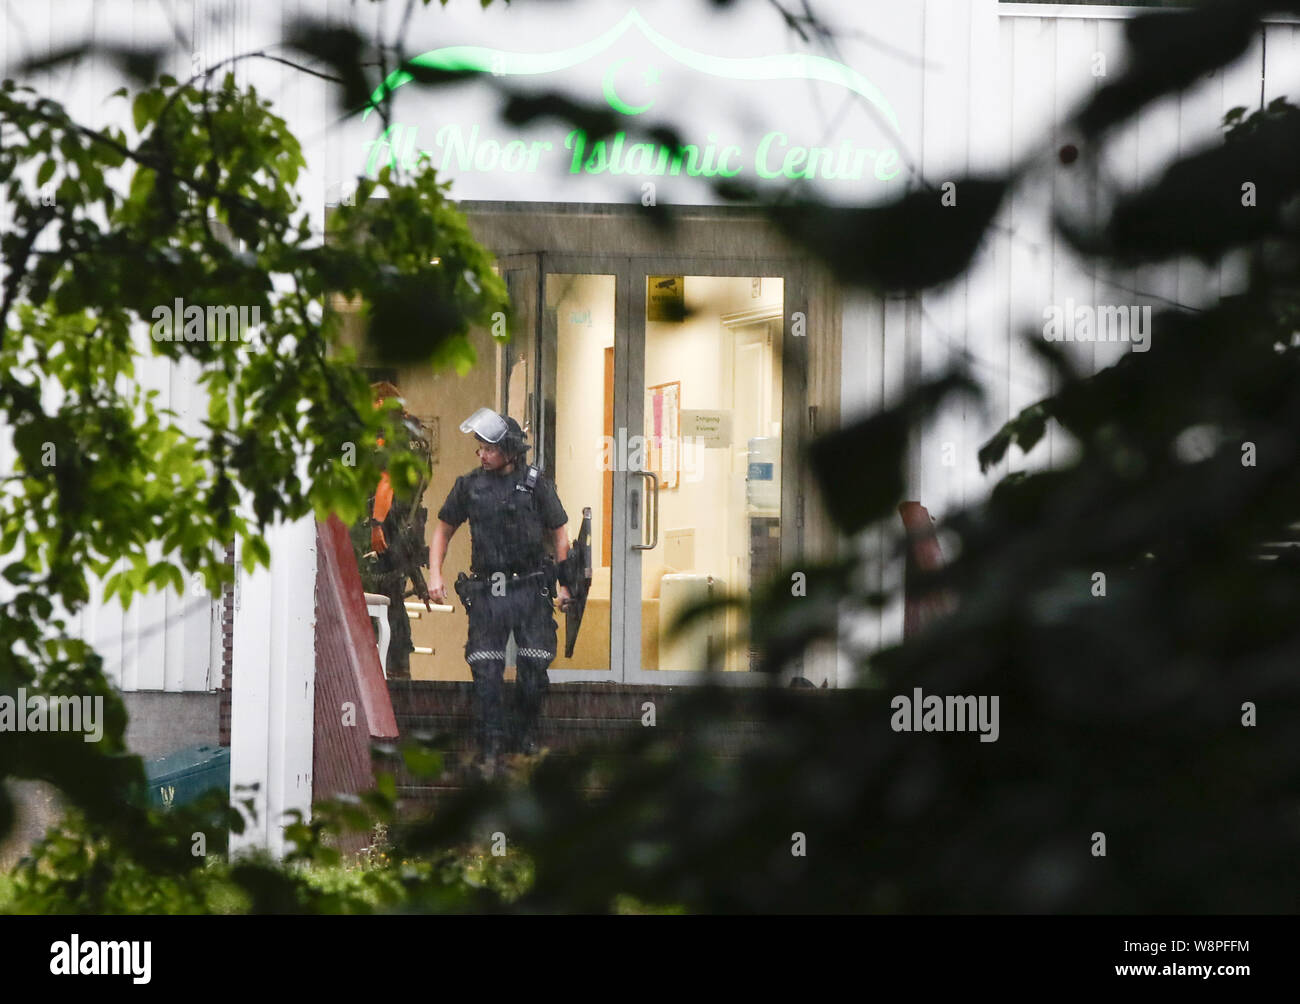 Oslo, Norway. 10th august, 2019. (190810) -- OSLO, Aug. 10, 2019 (Xinhua) -- A police officer walks out of the Al-Noor Islamic Center after a shooting in Baerum, near Oslo, Norway, on Aug. 10, 2019. A dead person was found after the Mosque shooting outside Oslo on Saturday, and it was being investigated in related to the shooting incident, police said late Saturday. (NTB Scanpix/Handout via Xinhua) Credit: Xinhua/Alamy Live News Stock Photo